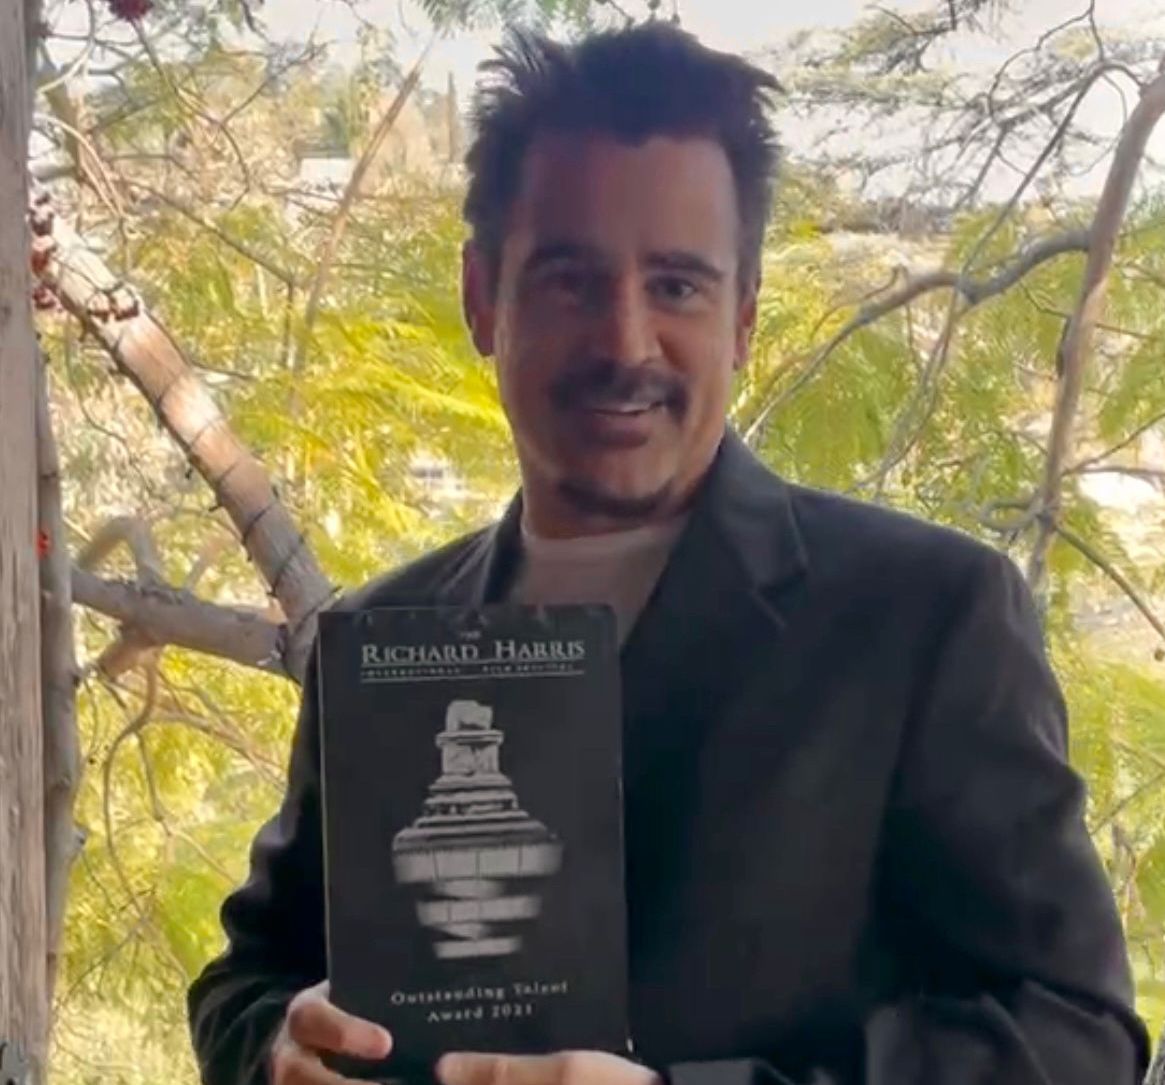 Colin Farrell pictured above with his award